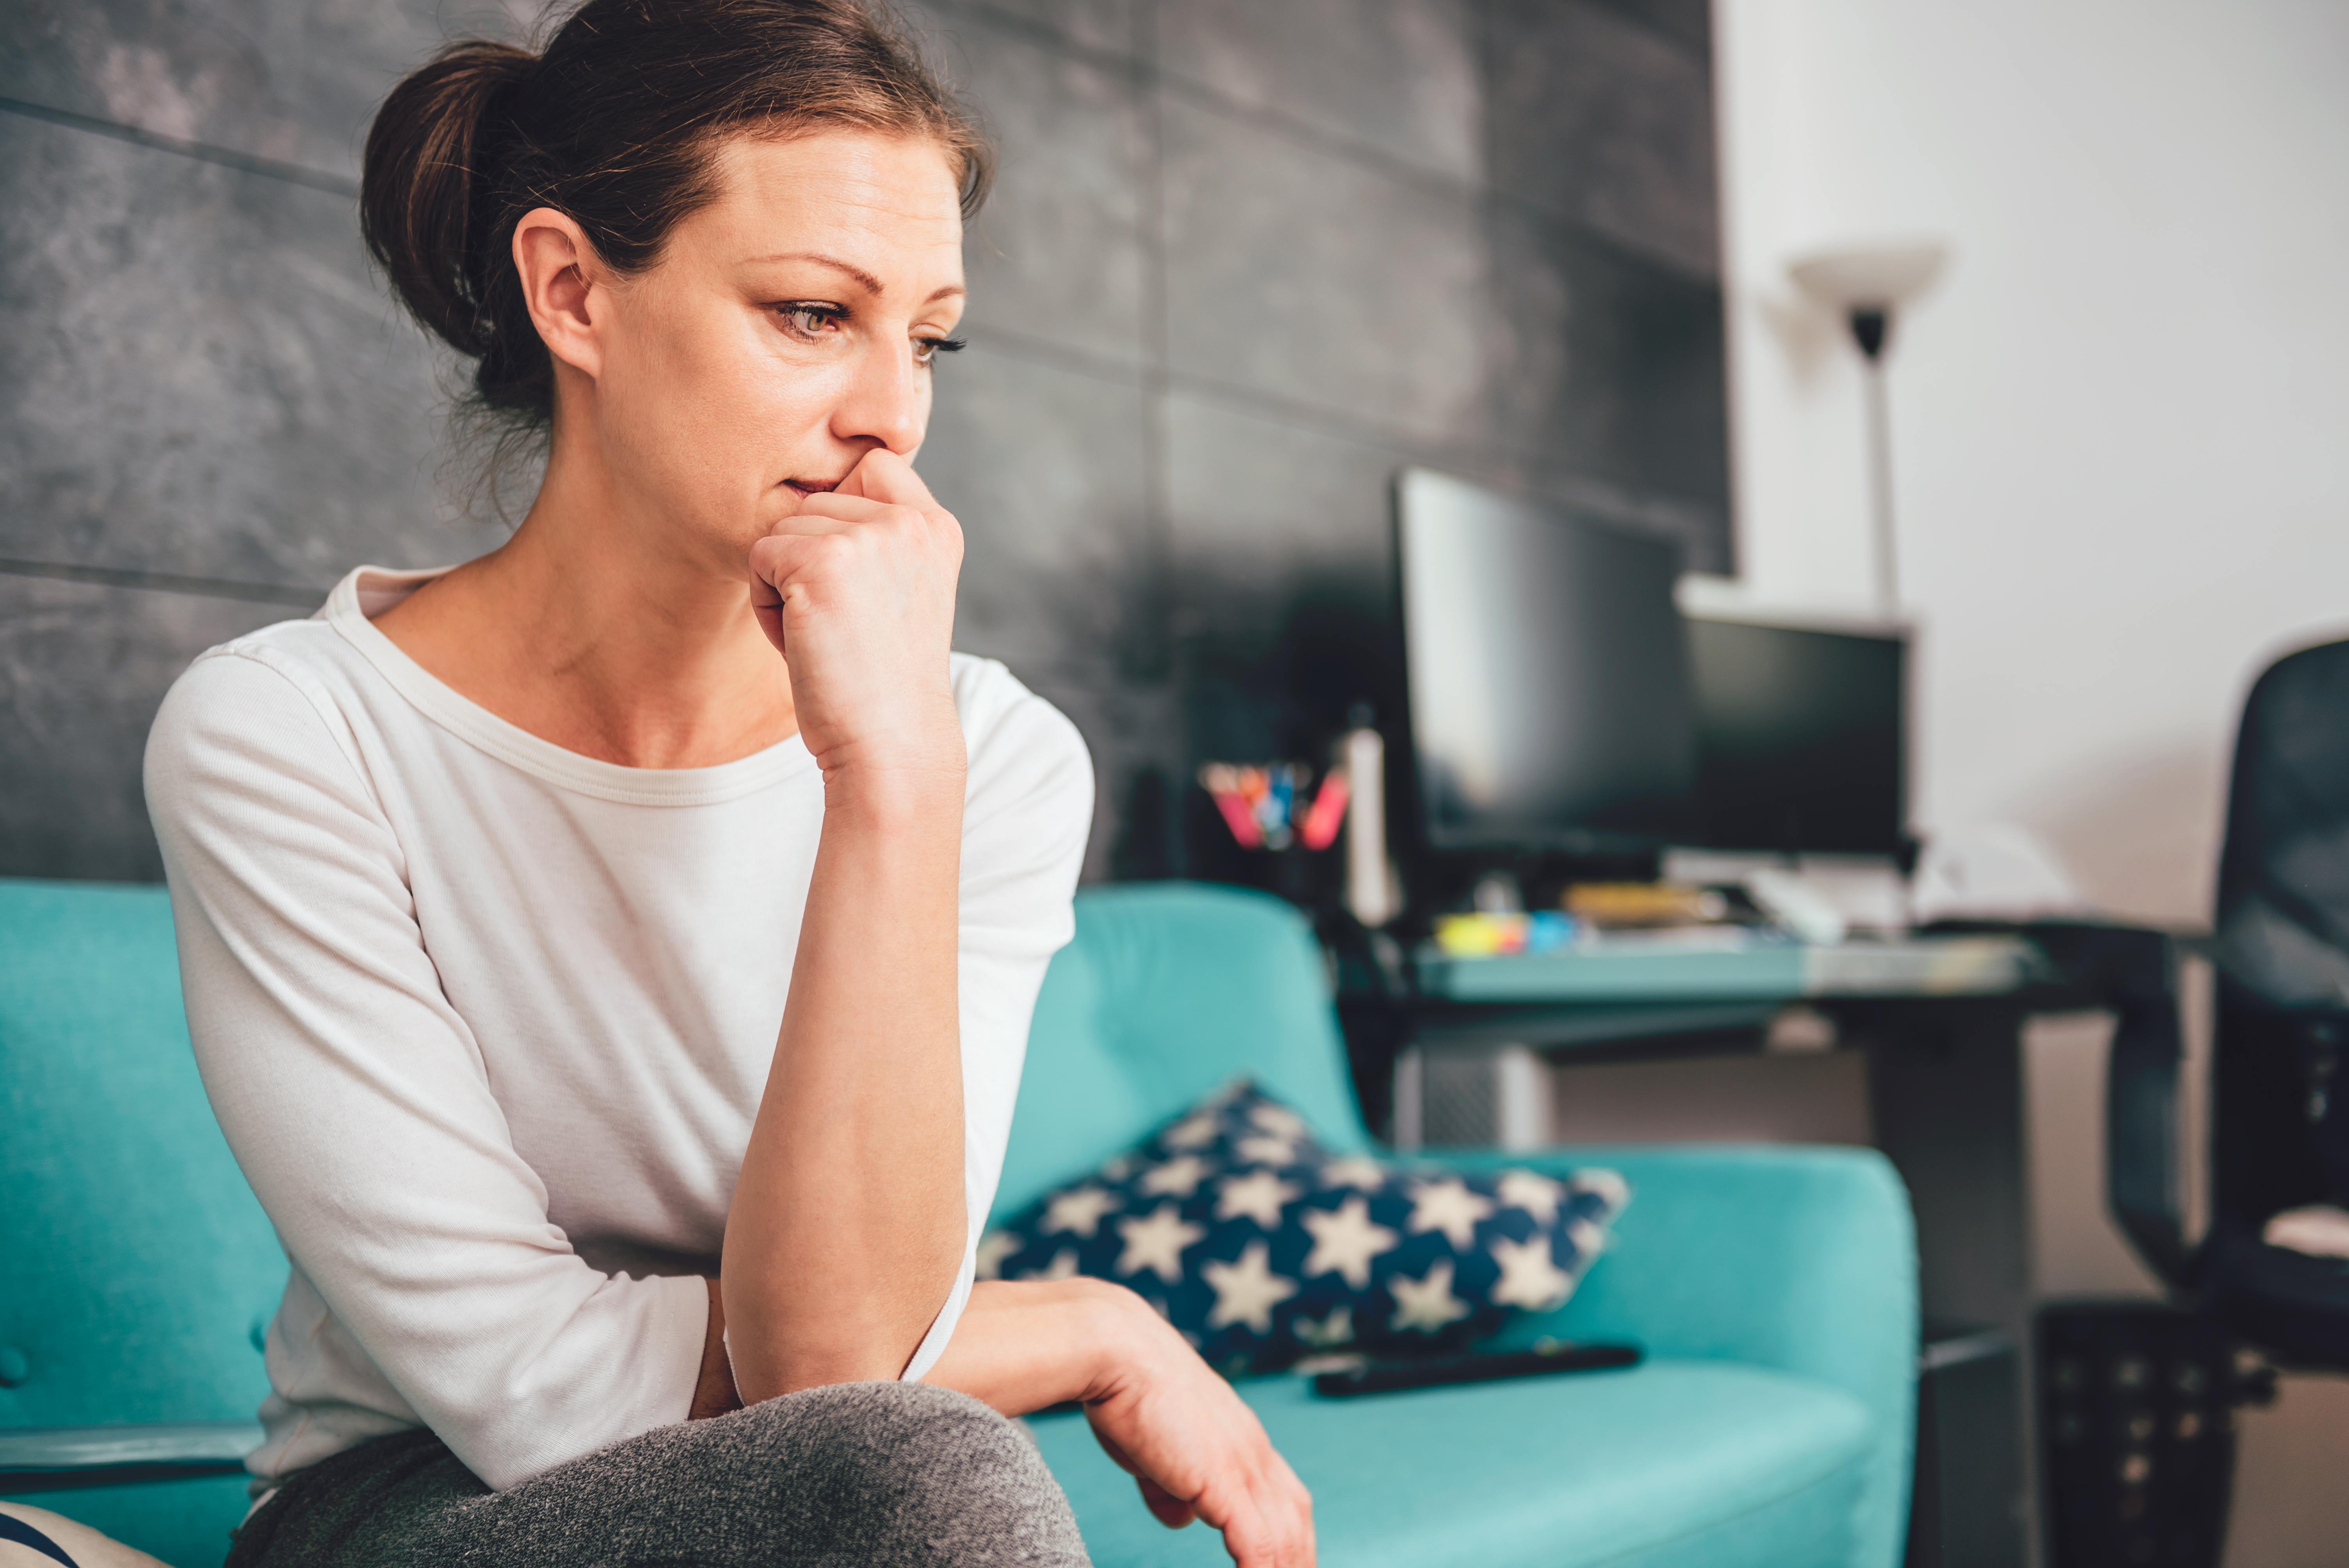 A distraught woman sitting on the sofa | Source: Shutterstock